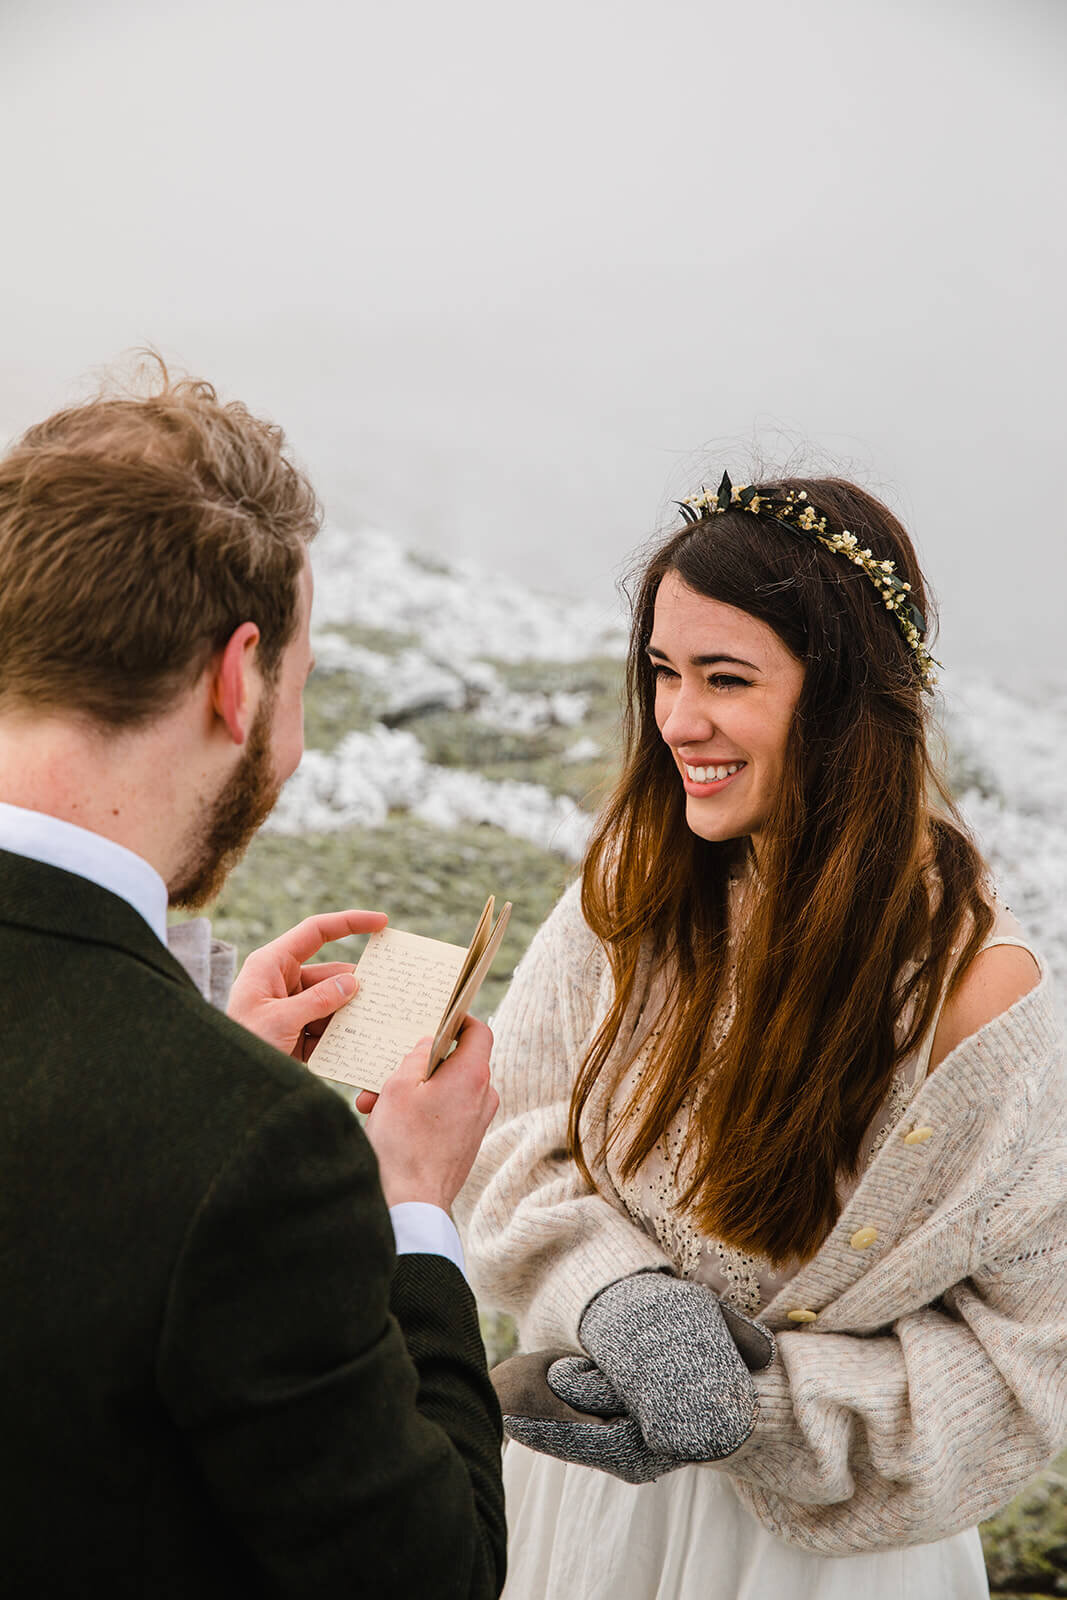  Eloping couple exchanges vows in frosty conditions during their adventure elopement on Mt. Mansfield, Vermont’s tallest mountain.  Vermont mountain wedding. Vermont winter elopement. Vermont elopement packages. 